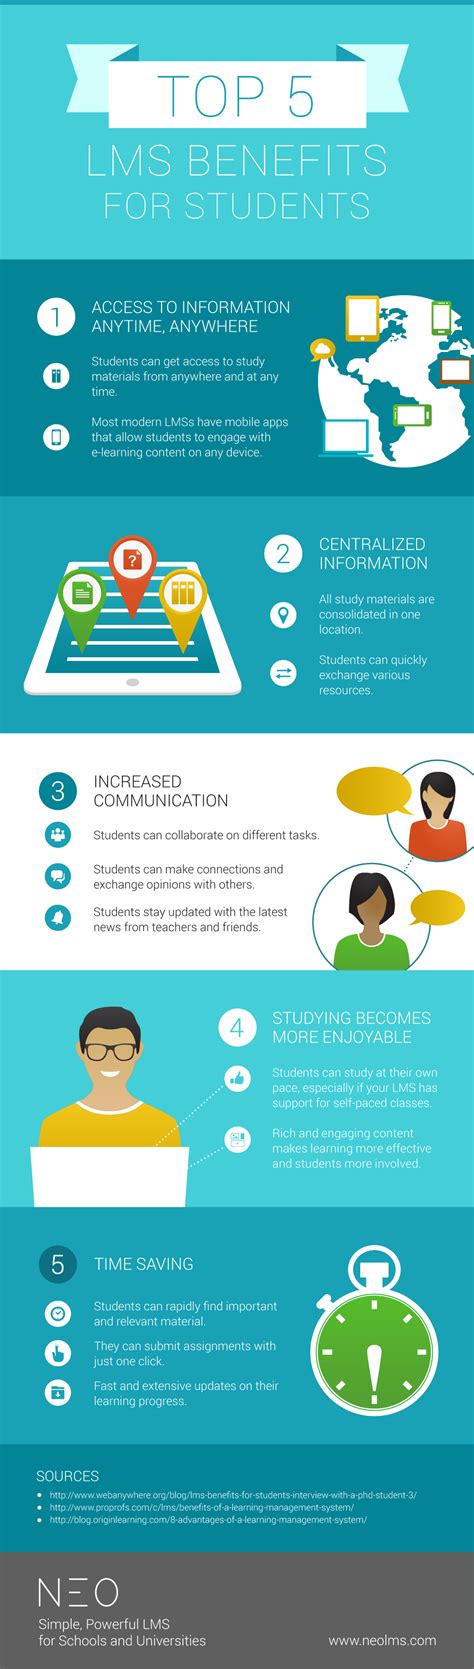 The Top 5 Lms Benefits For Students Infographic Presents 5 Ways In